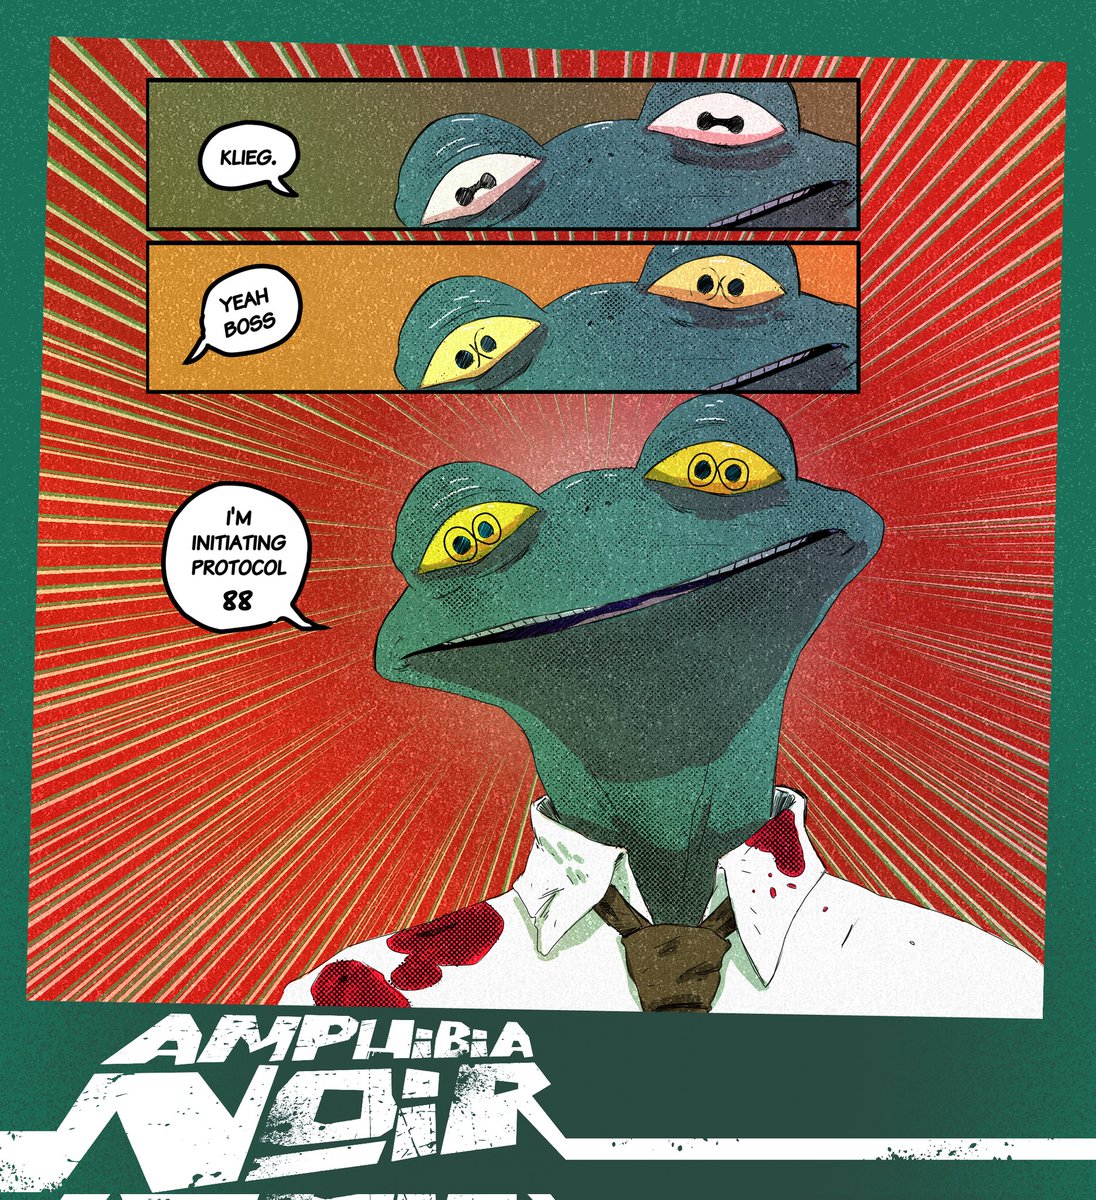 With the next part of #amphibianoir on the way, thought I best keep reminding people it will be coming, and it is going to be another wild ride.

#indiecomics #indie #localcomic #australiancomics #frog #comicbook #digitalart #sequentialart #loganfrench